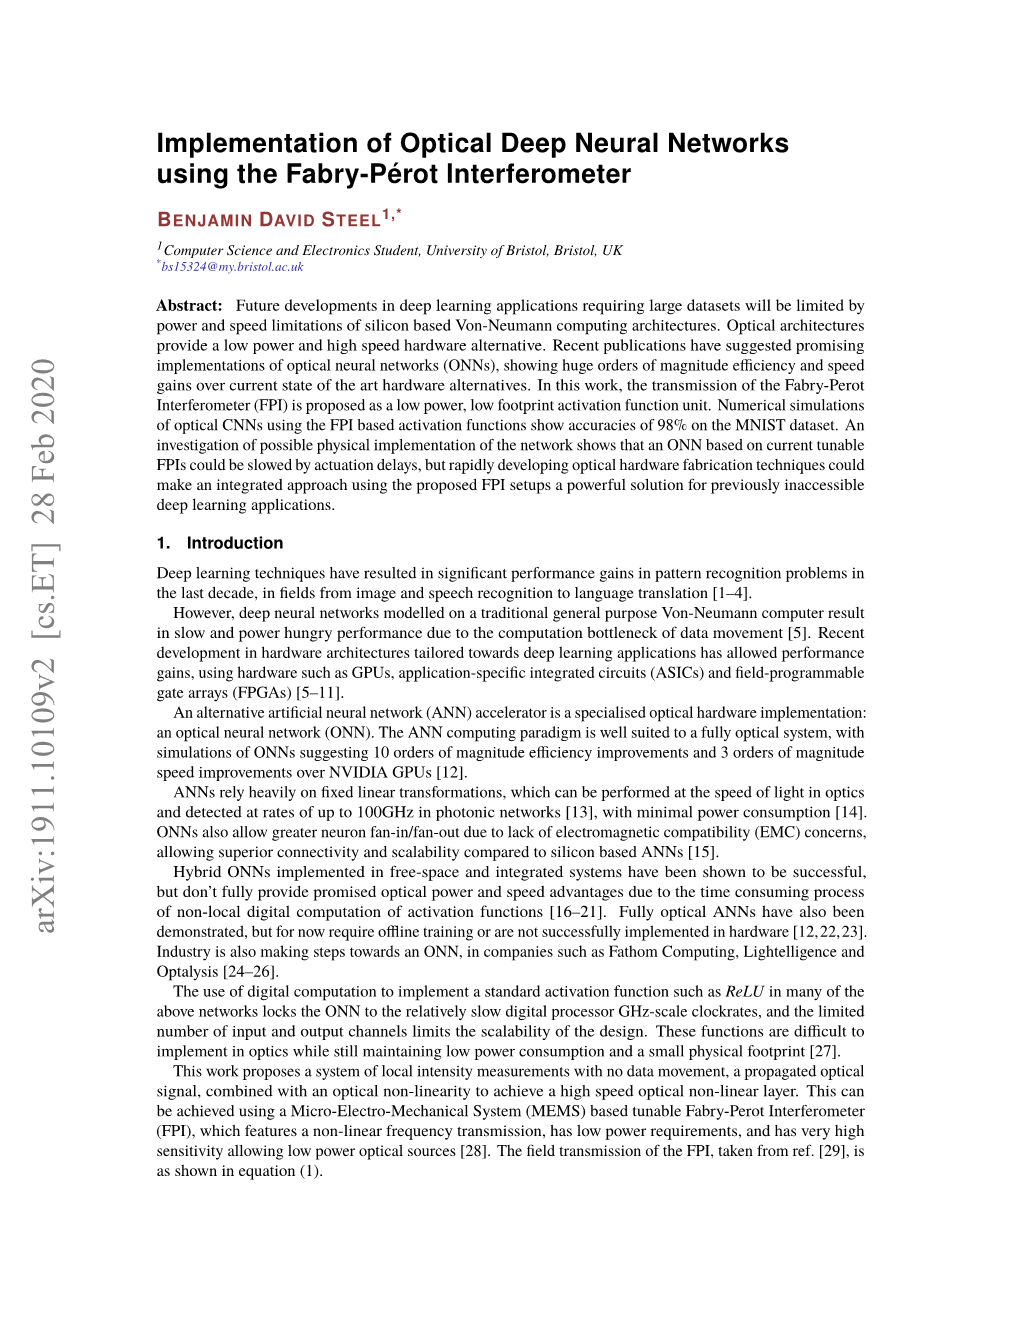 Implementation of Optical Deep Neural Networks Using the Fabry-Pérot Interferometer